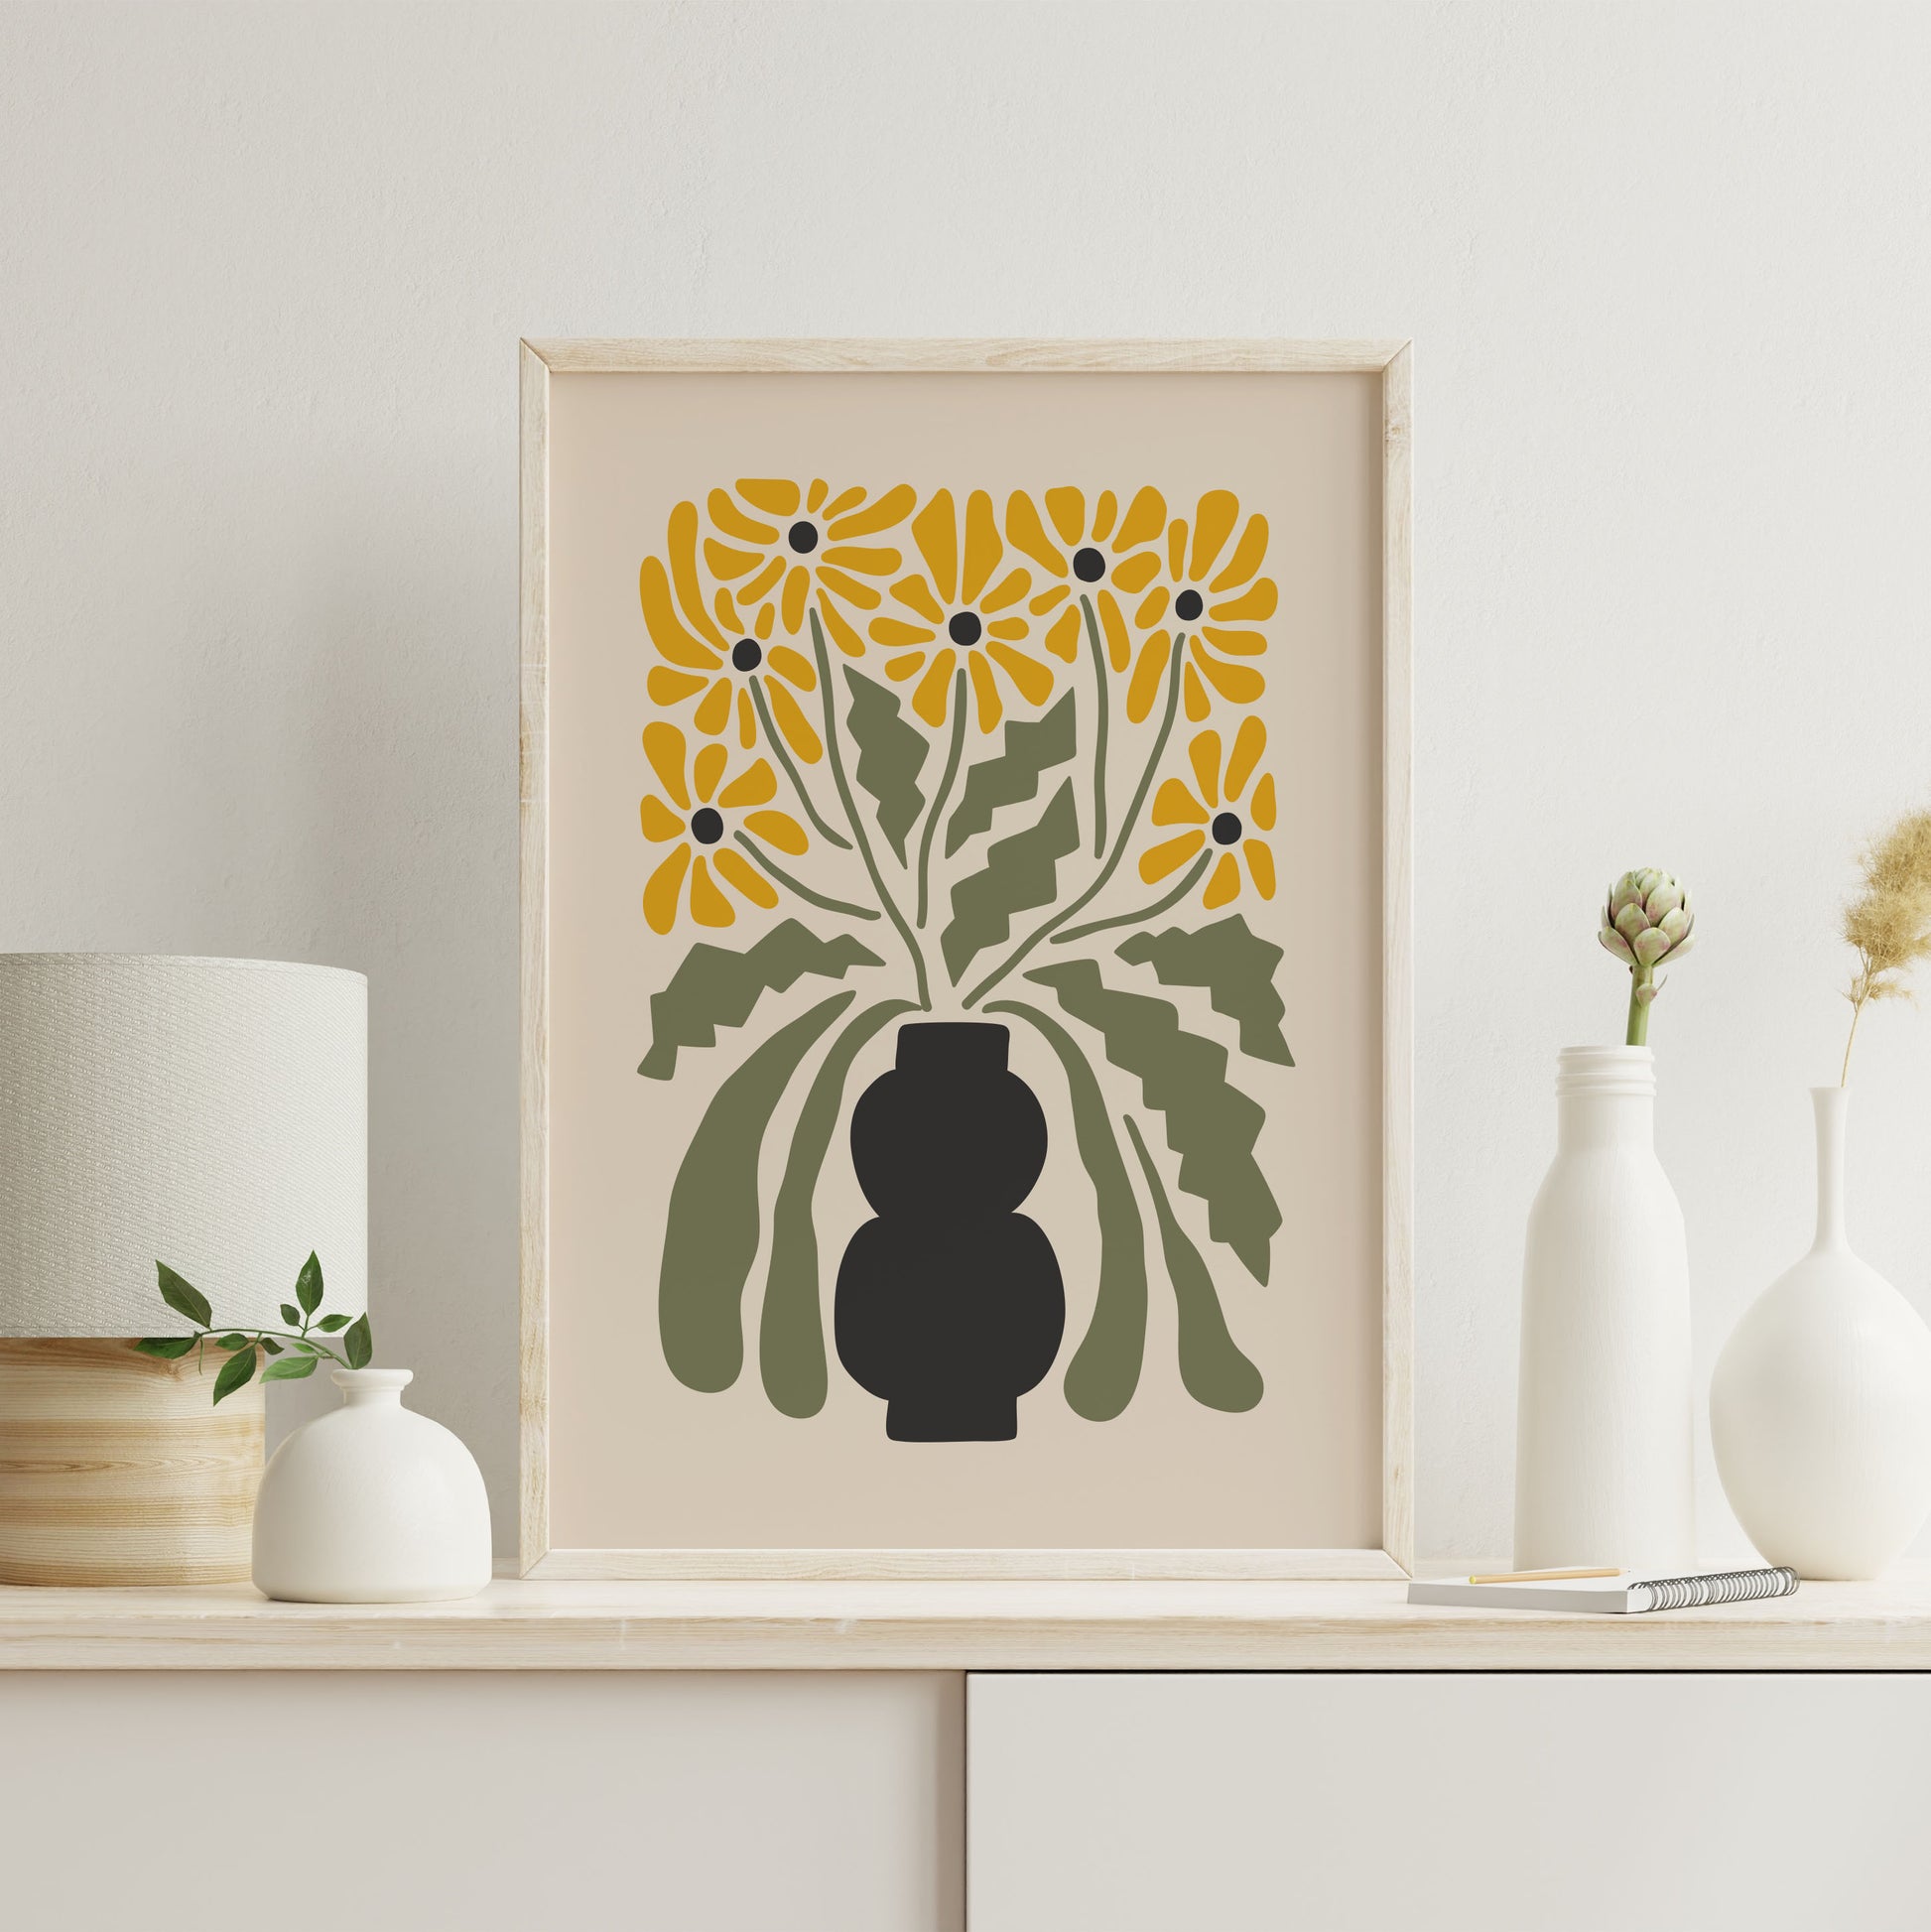 Botanical flower print in green and yellow